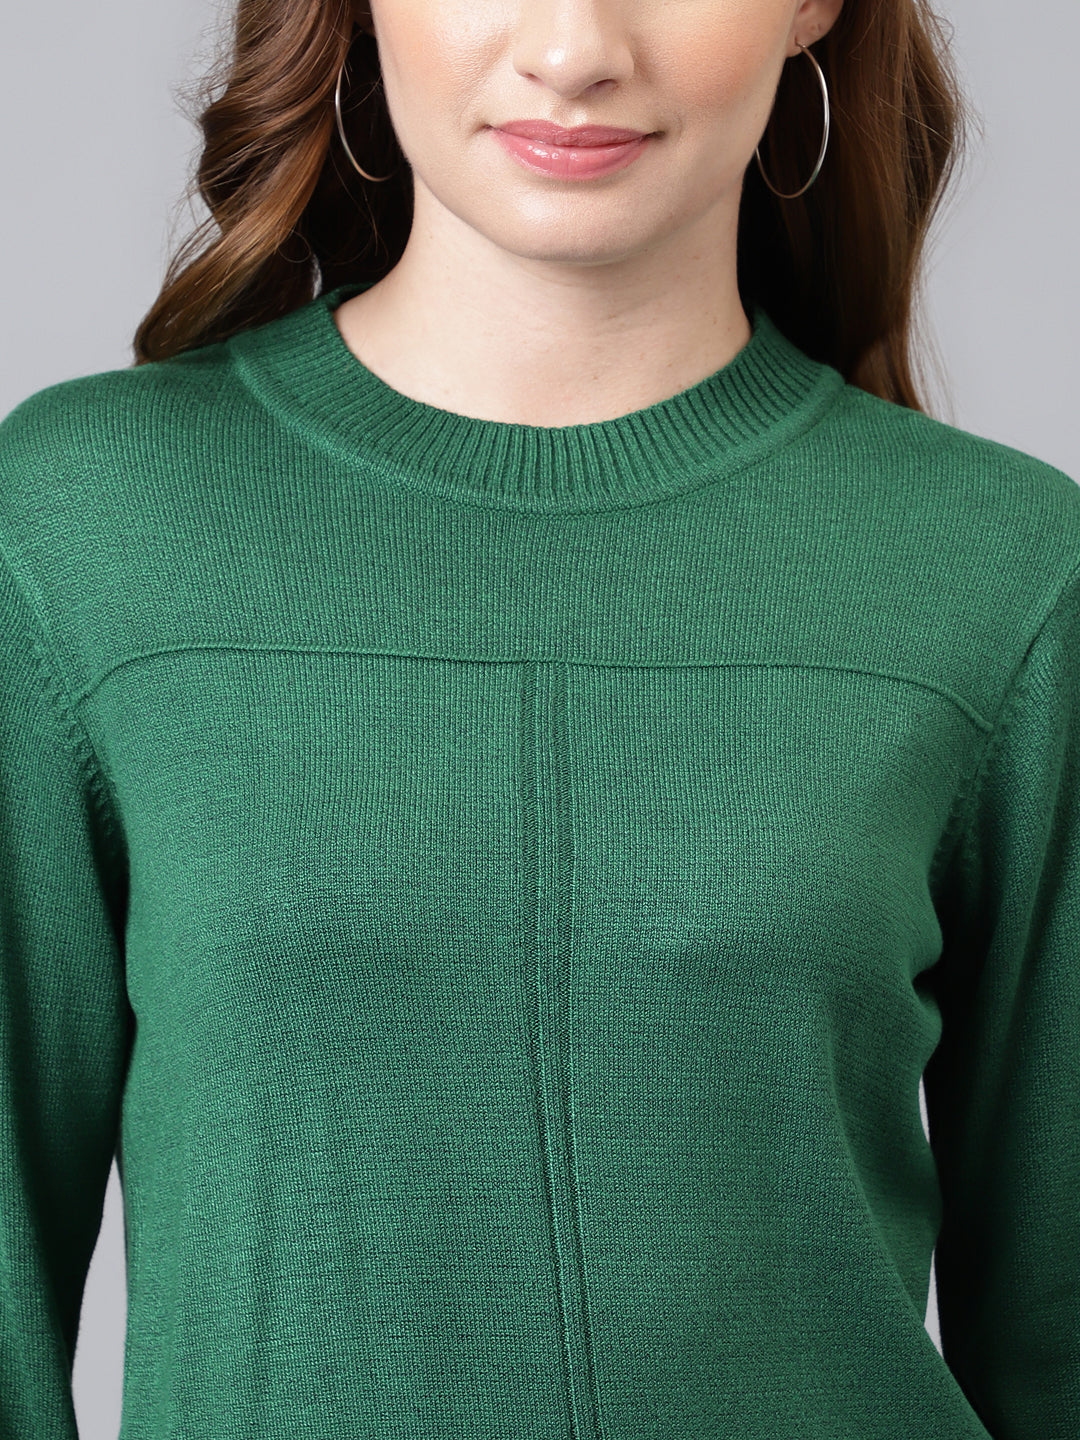 Greenforst Full Sleeve Solid Normal Pullover Sweatertop